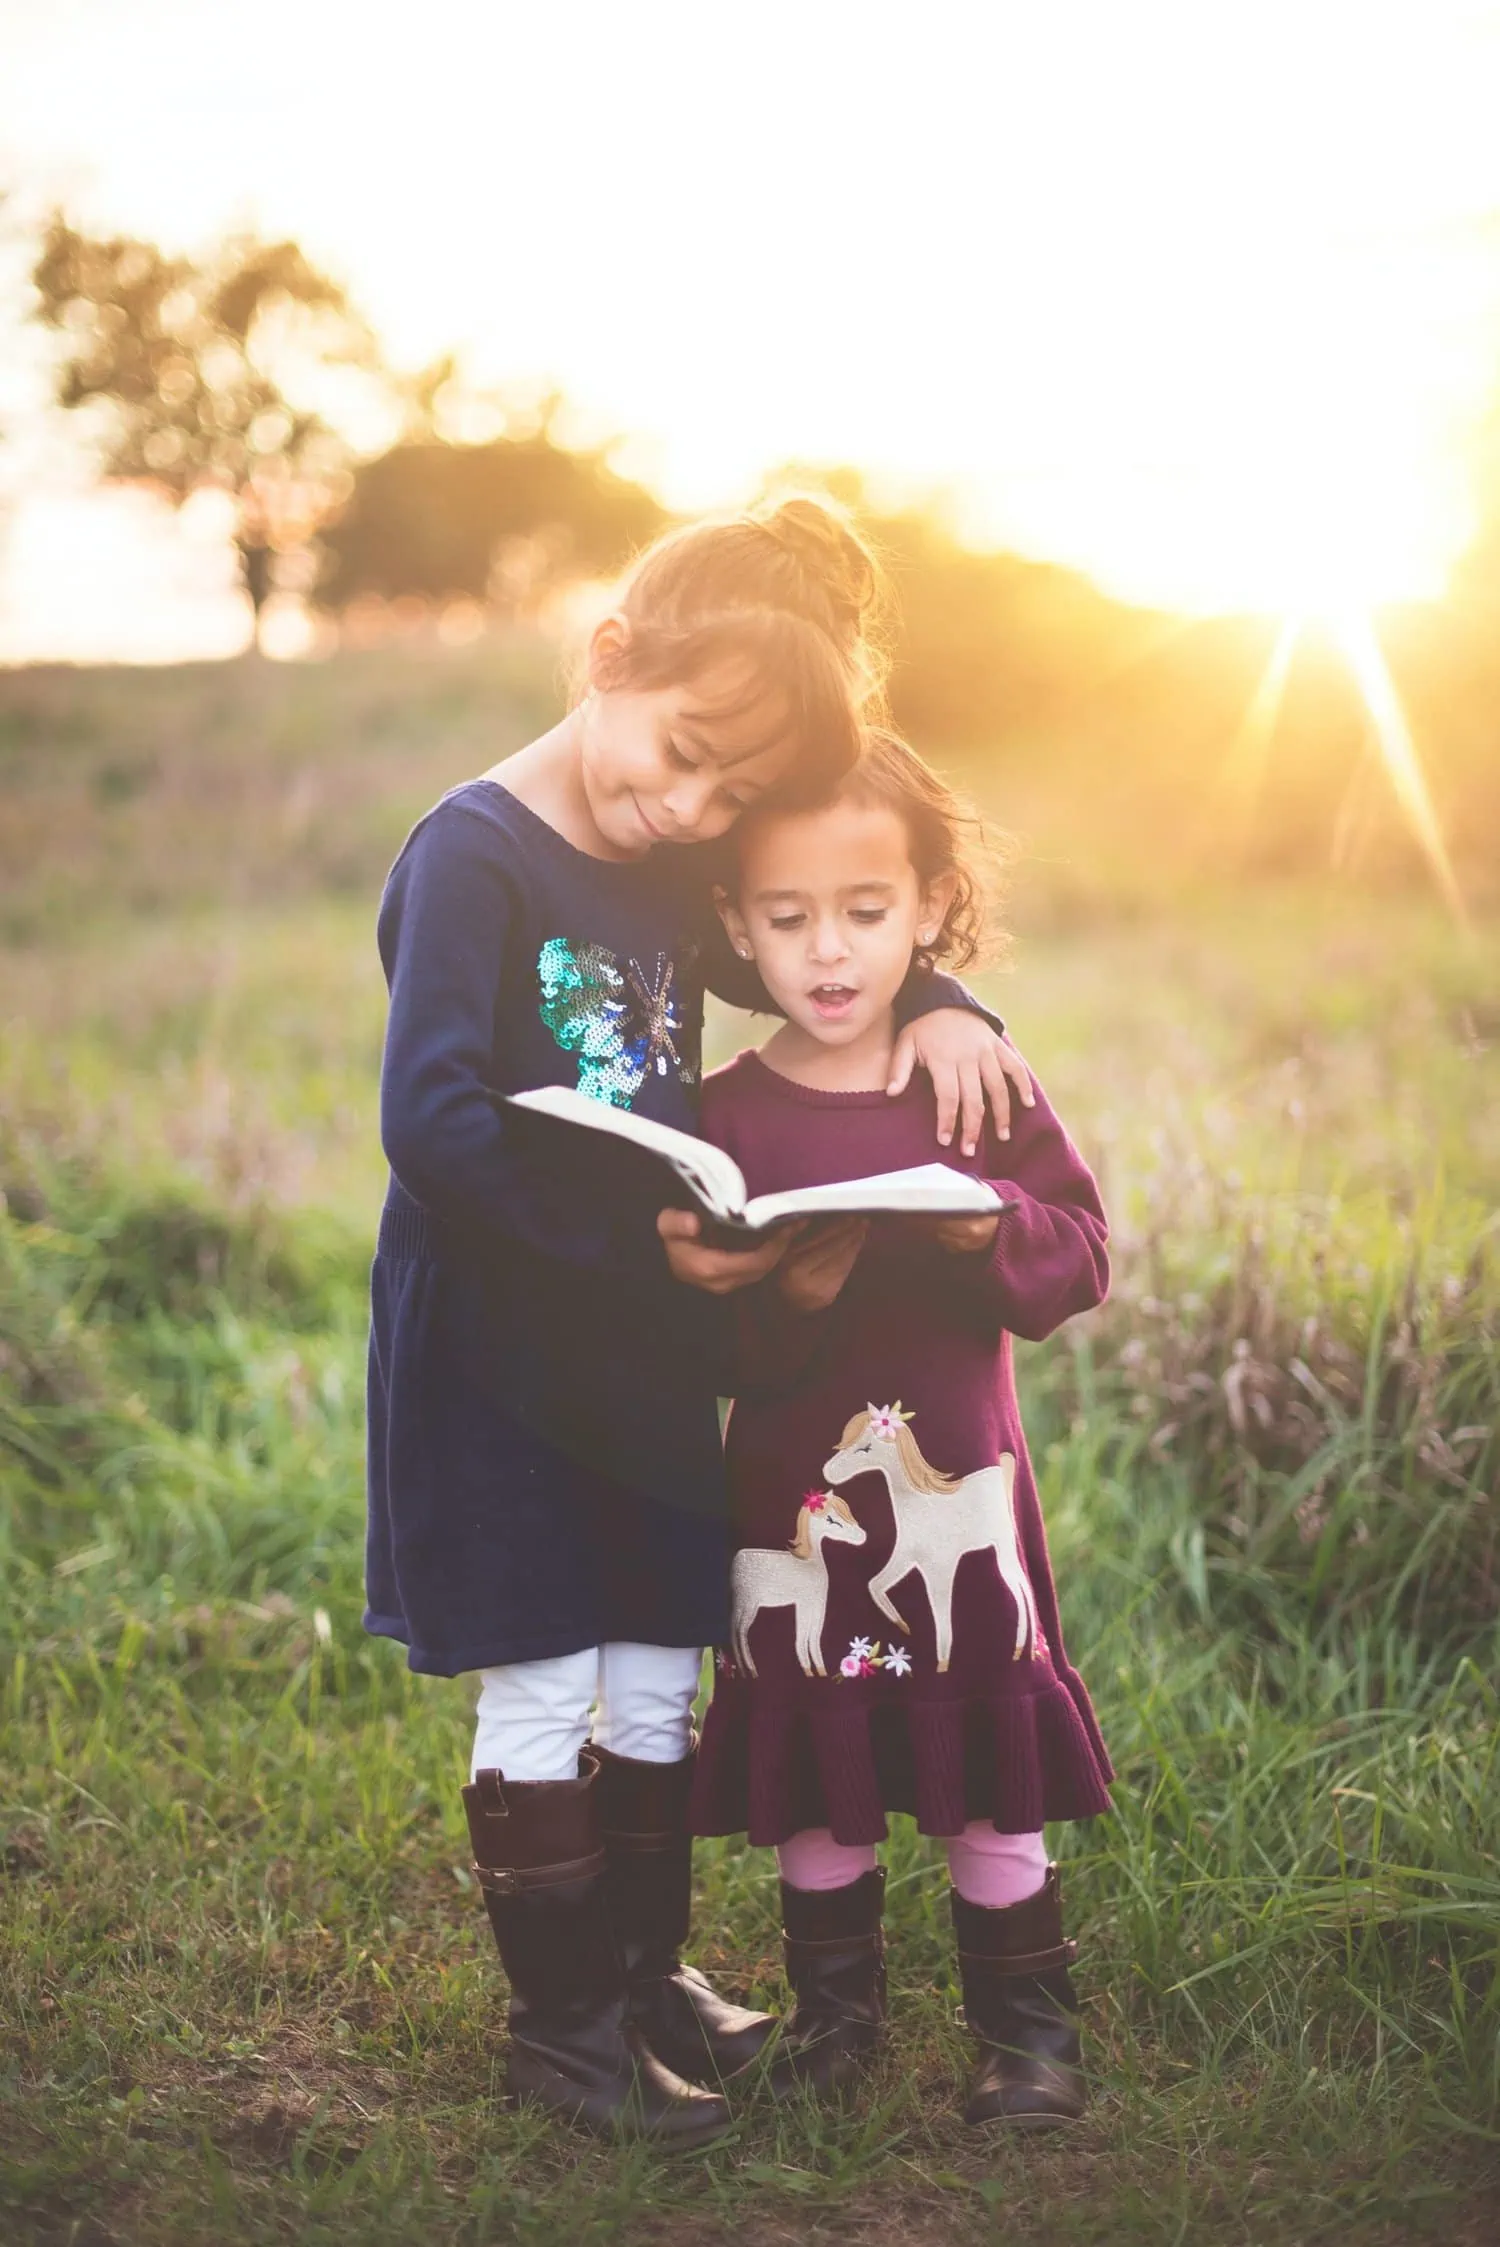 Two siblings reading a book together in the sunset, loving